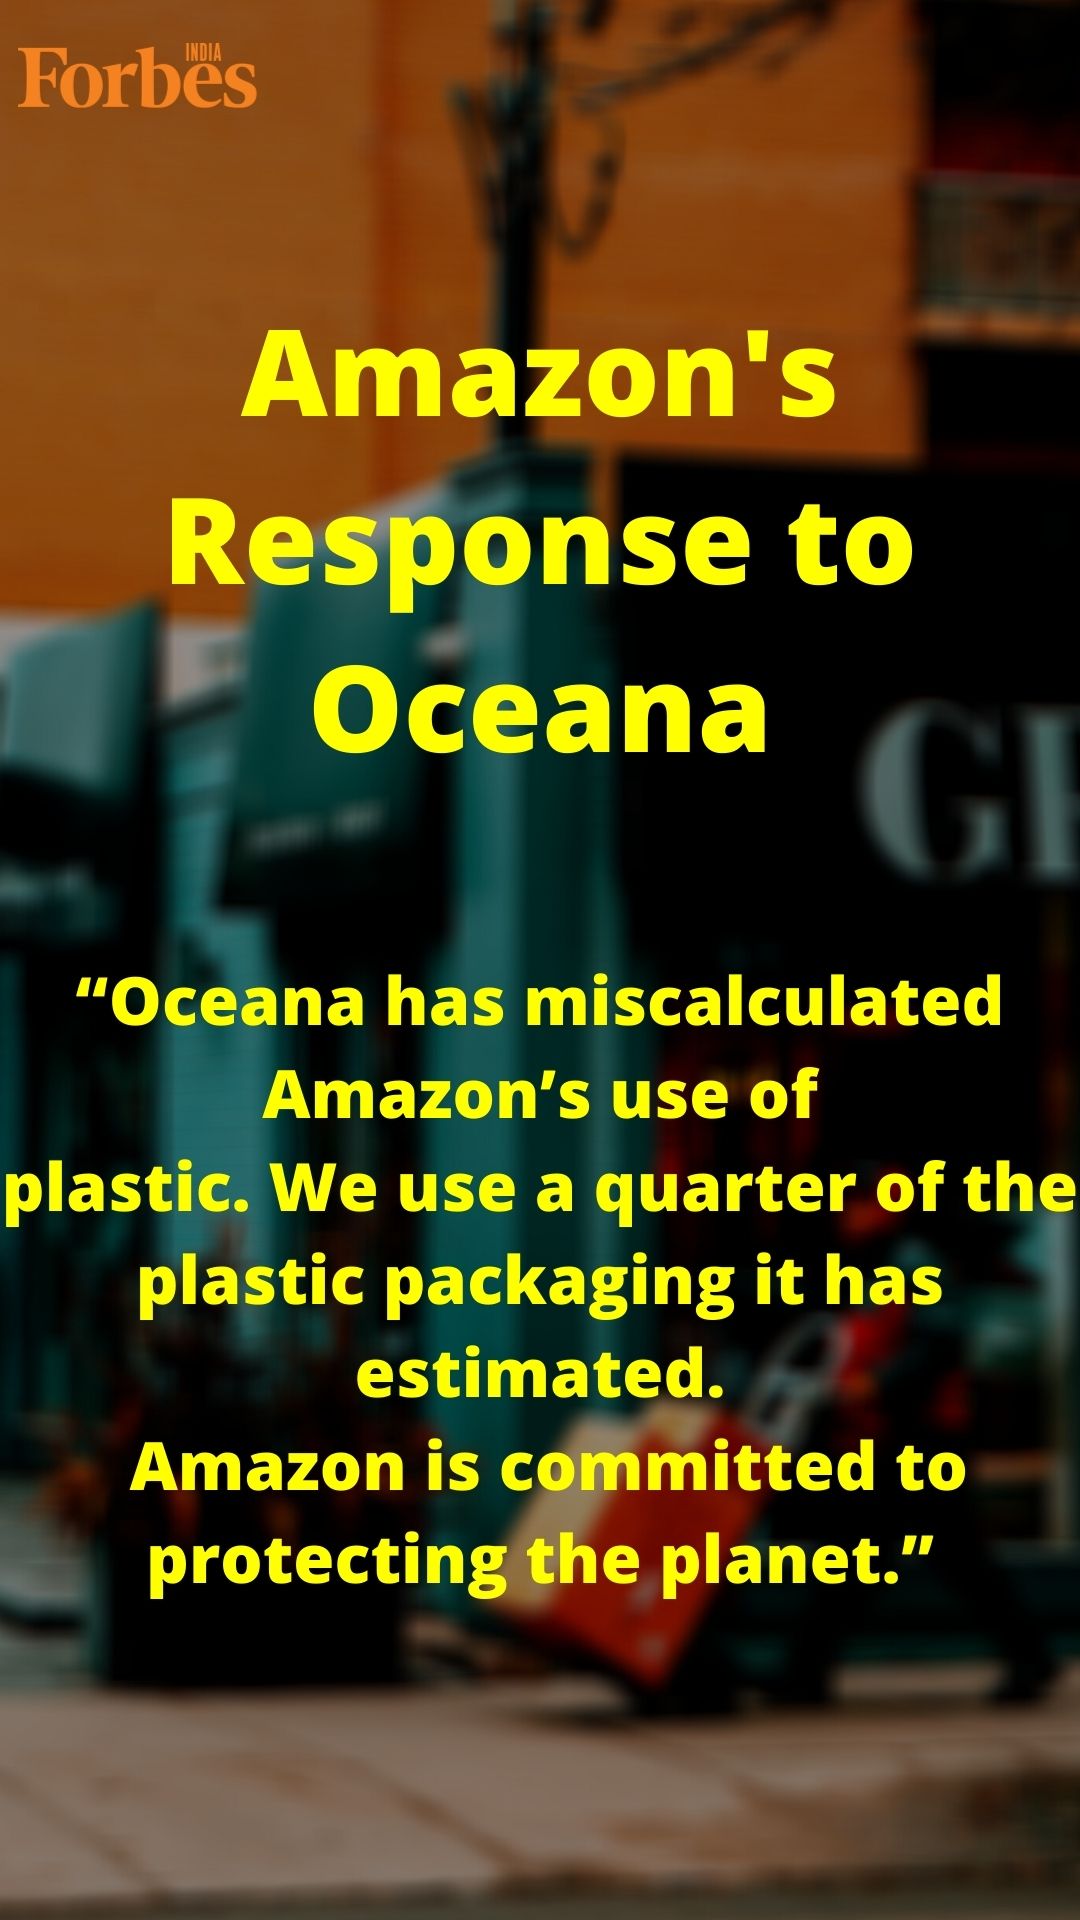 Amazon's plastic packaging waste can circle the Earth 500 times, study finds